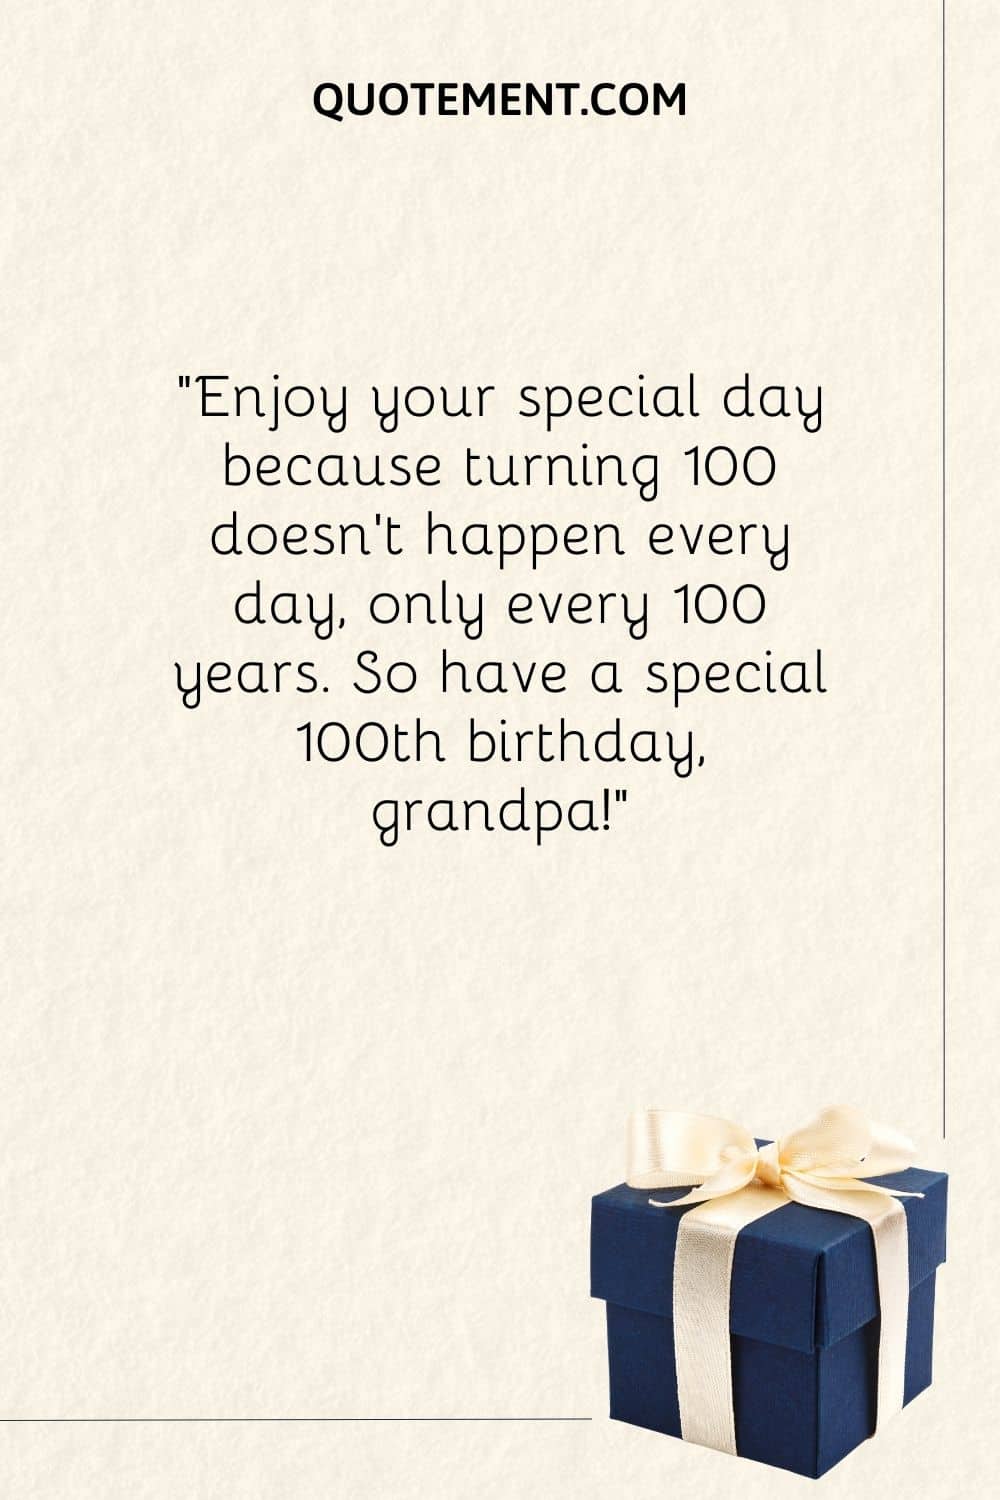 Enjoy your special day because turning 100 doesn’t happen every day, only every 100 years